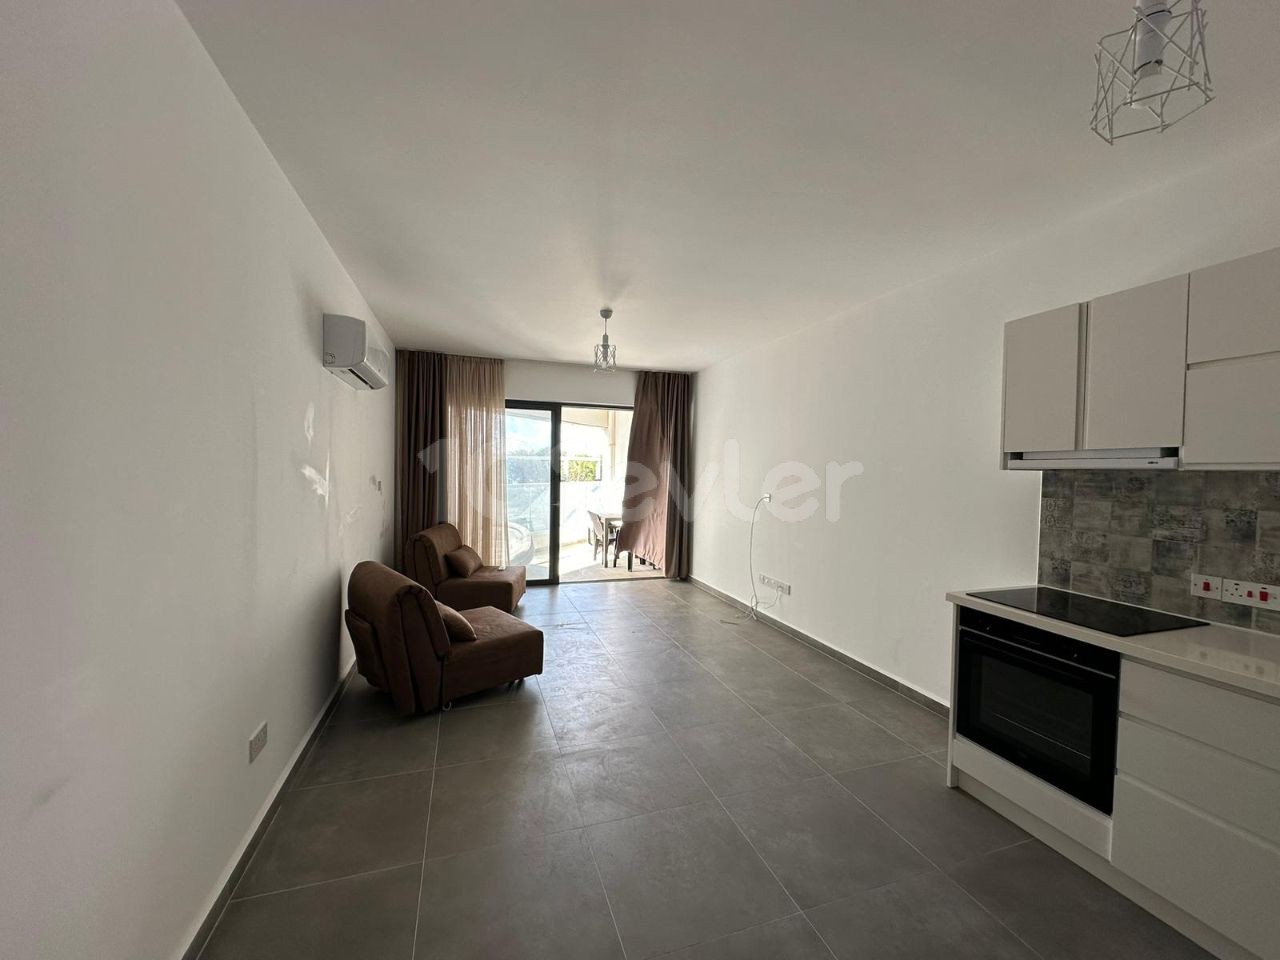 1 bedroom flat for sale by the sea, within the site